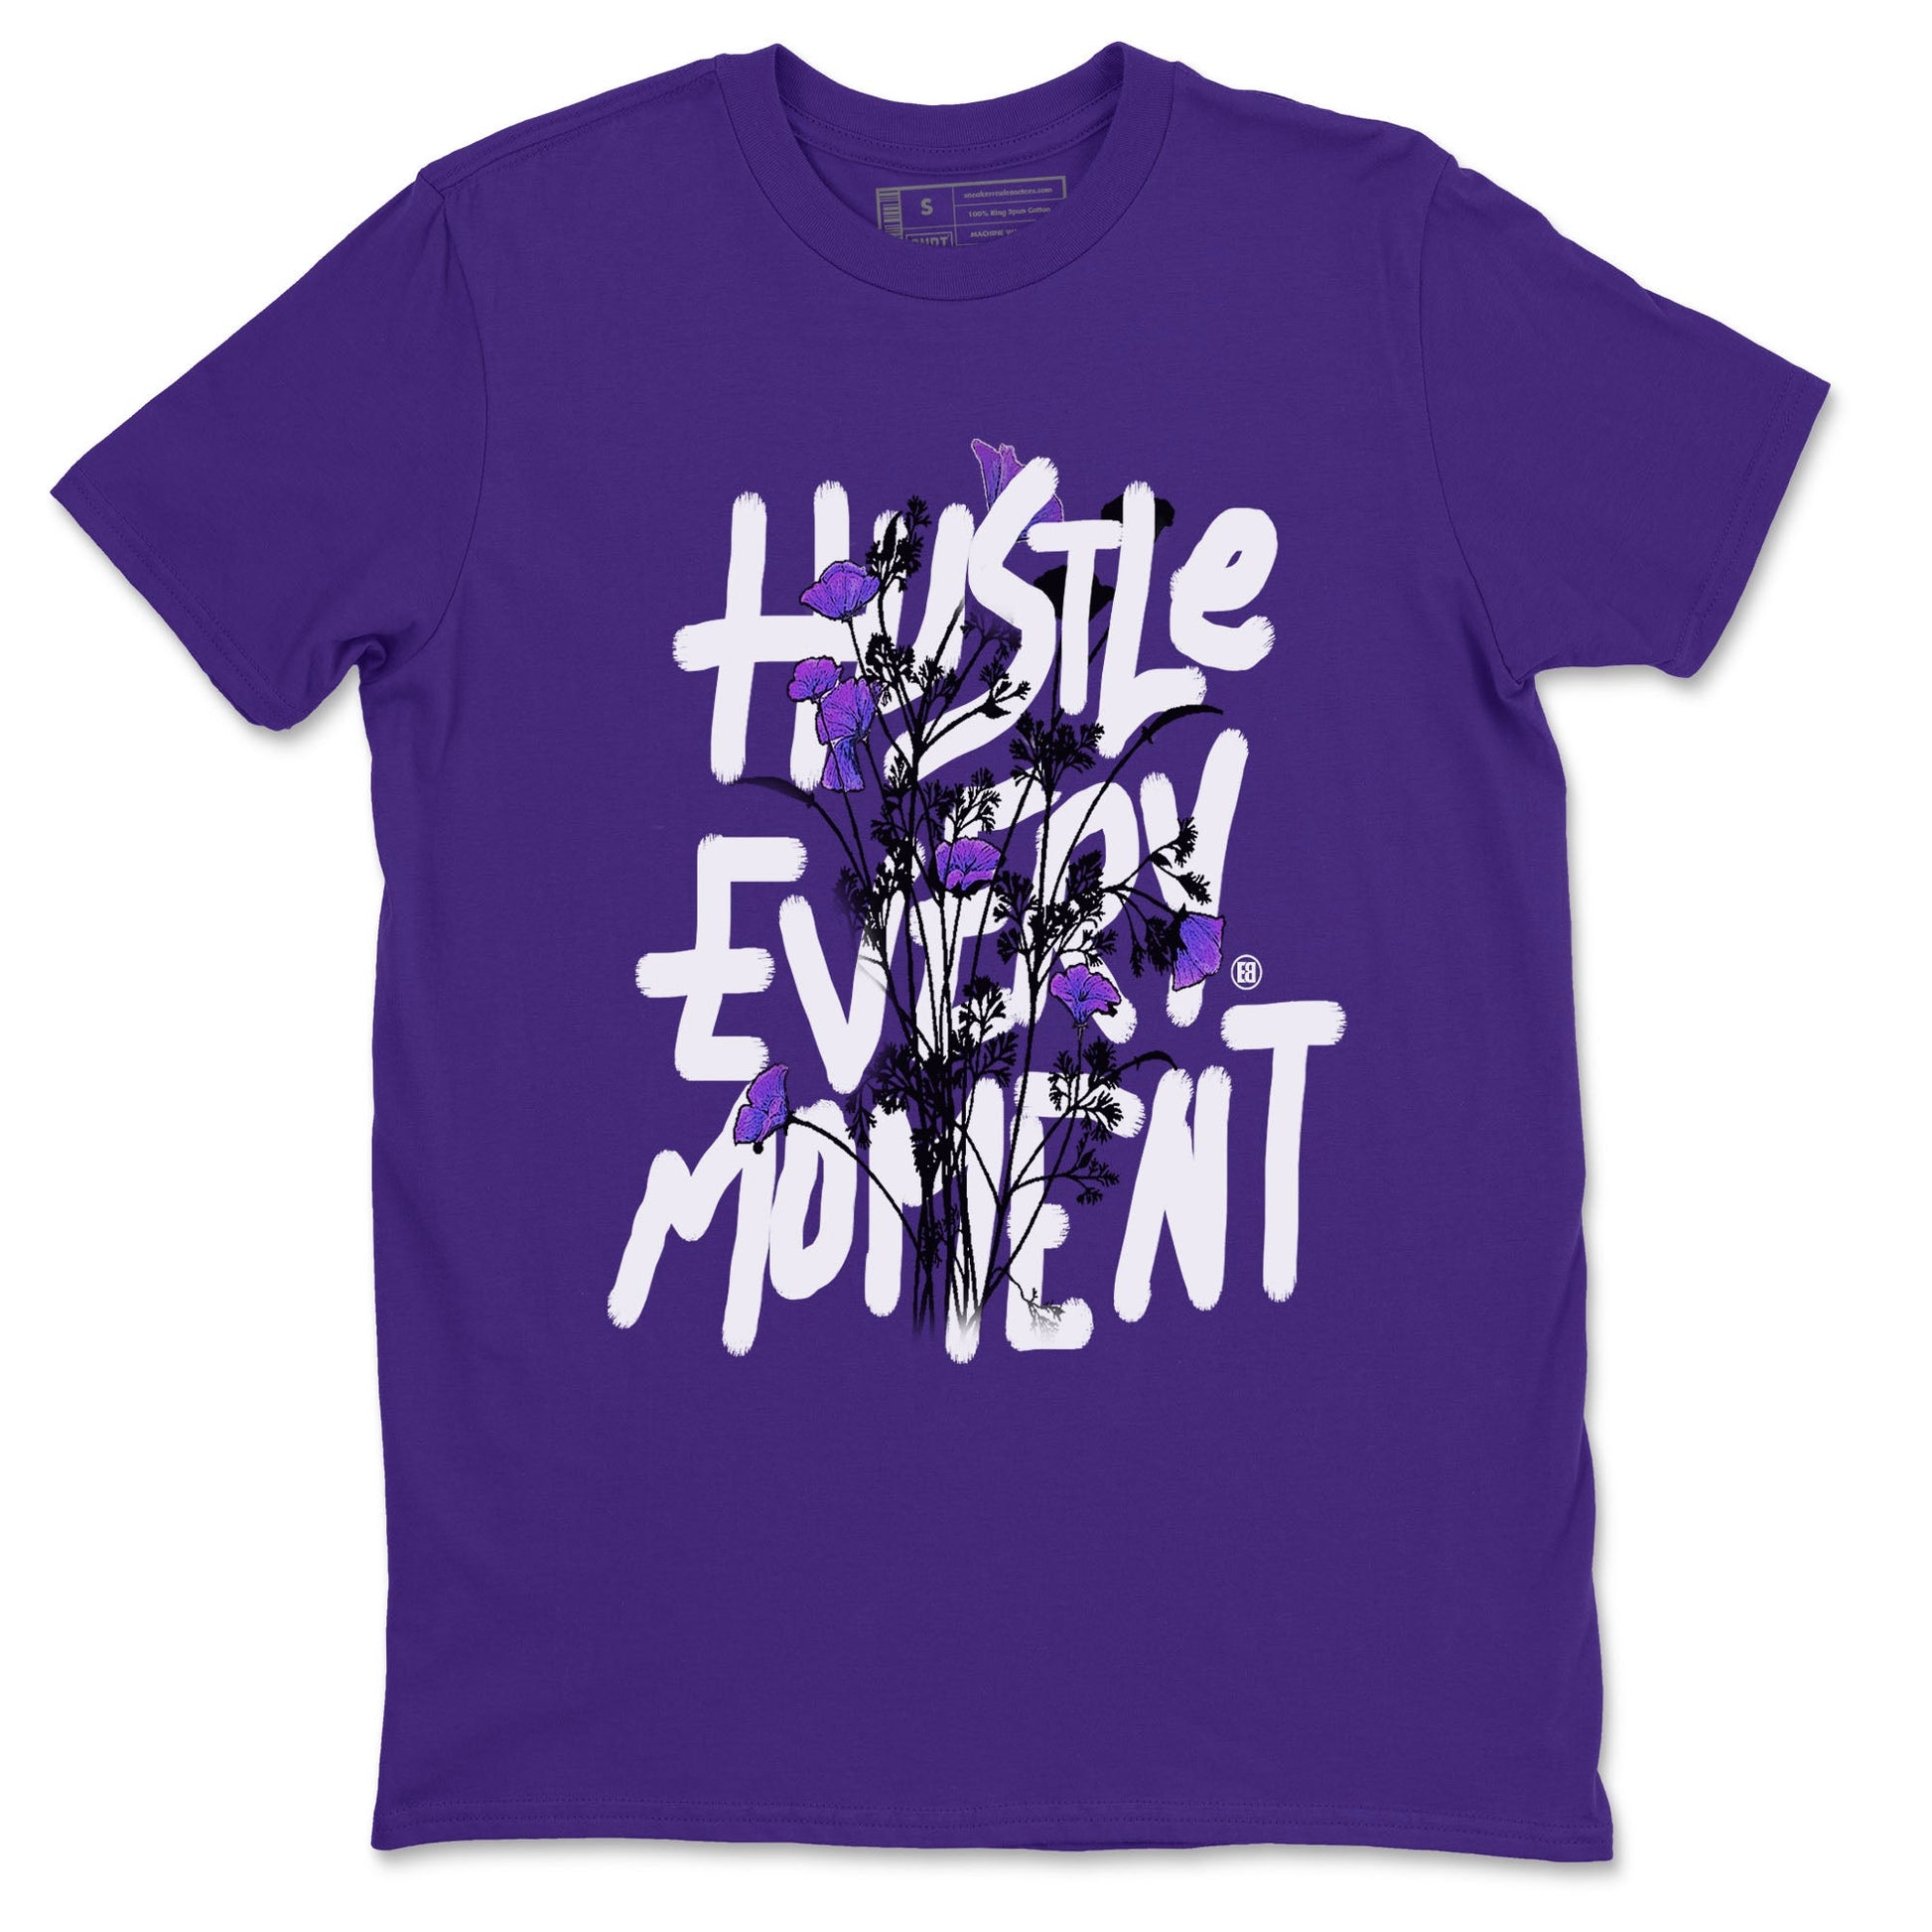 Hustle Every Moment sneaker match tees to Court Purple Dunks street fashion brand for shirts to match Jordans SNRT Sneaker Tees Dunk Low Court Purple unisex t-shirt Purple 2 unisex shirt